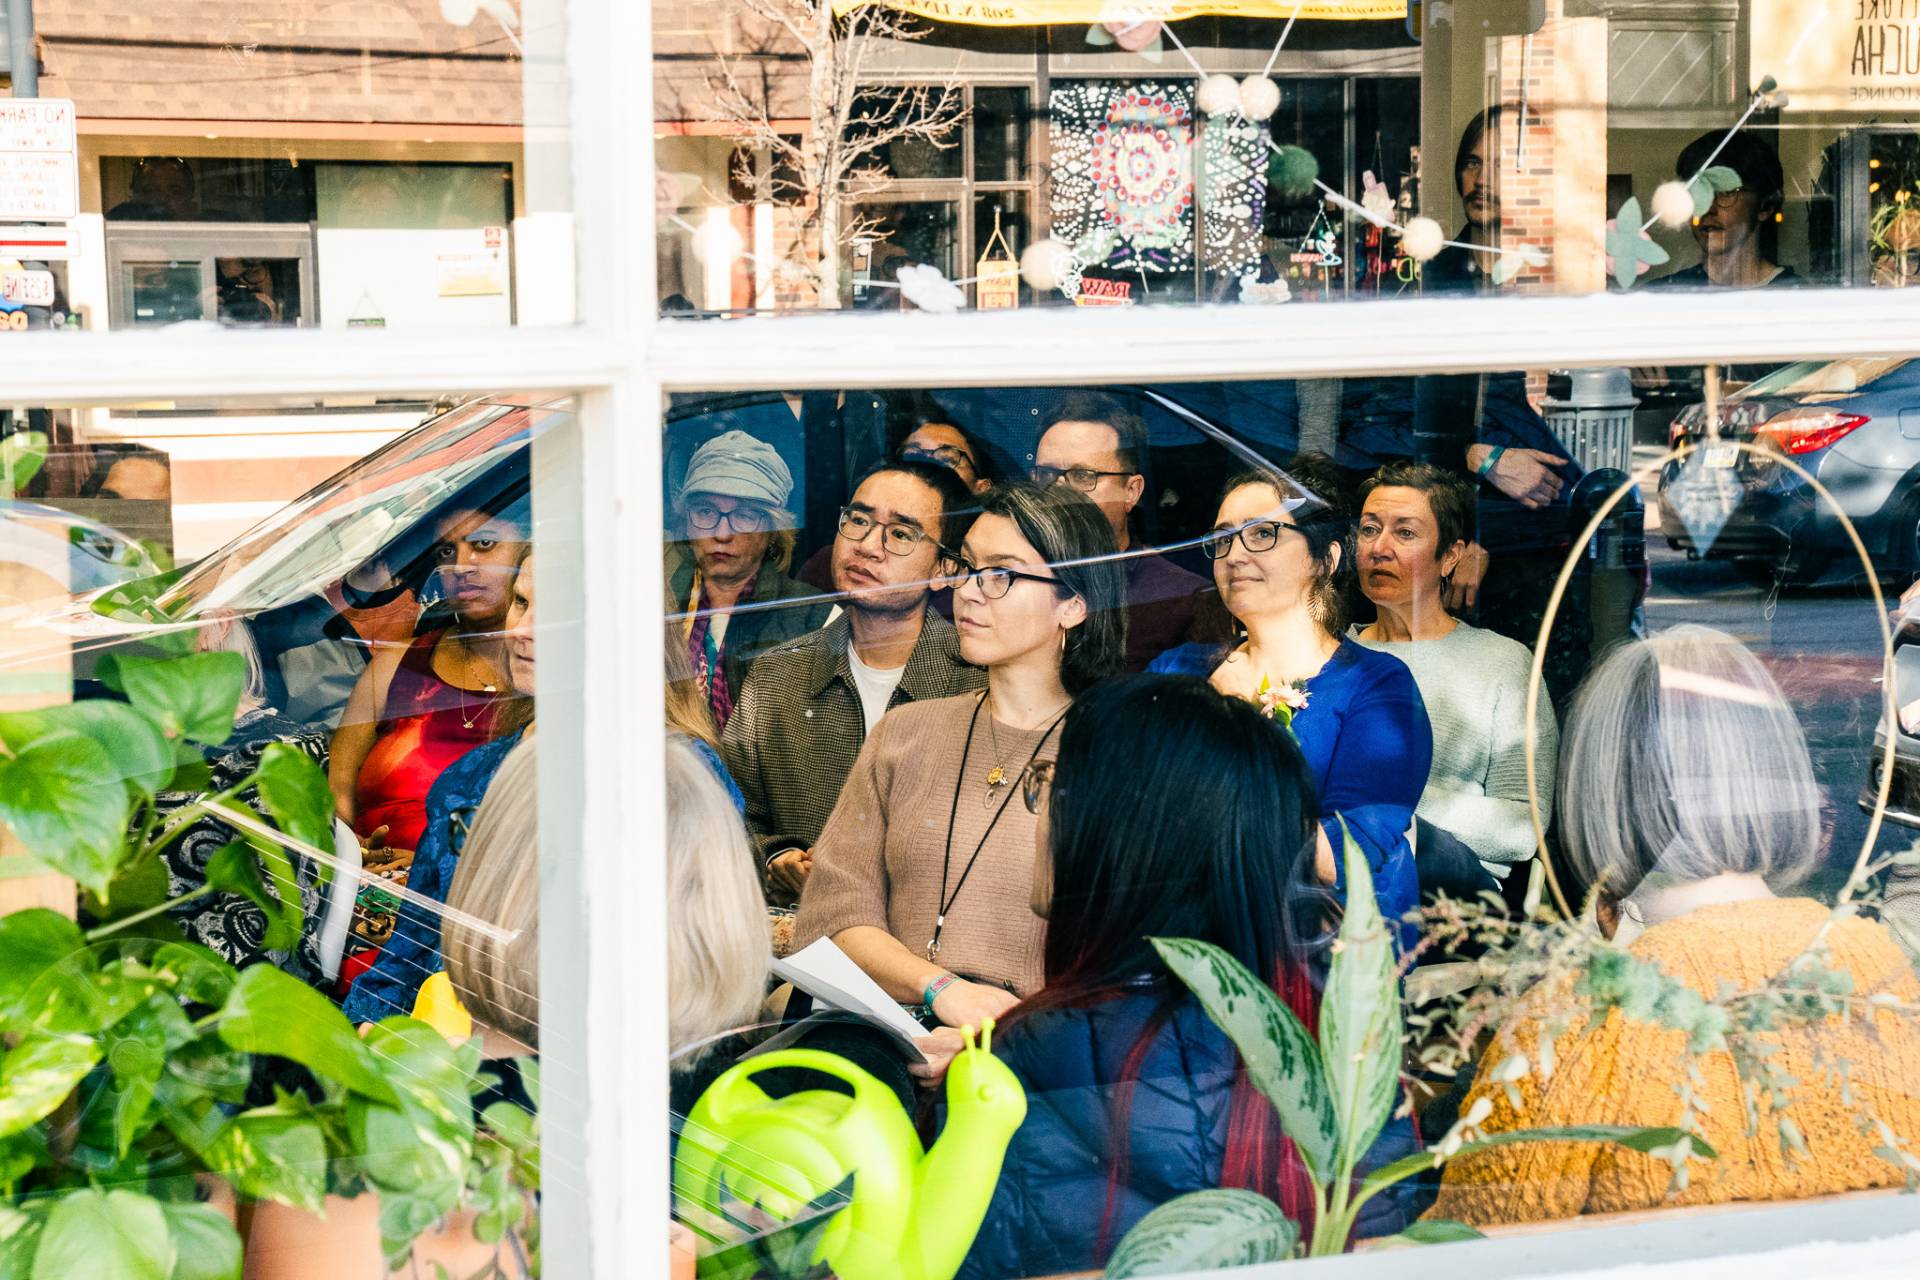 crowd enjoying readings at local flower shop, Willow & Stock. Photo by Alyssa Leicht.